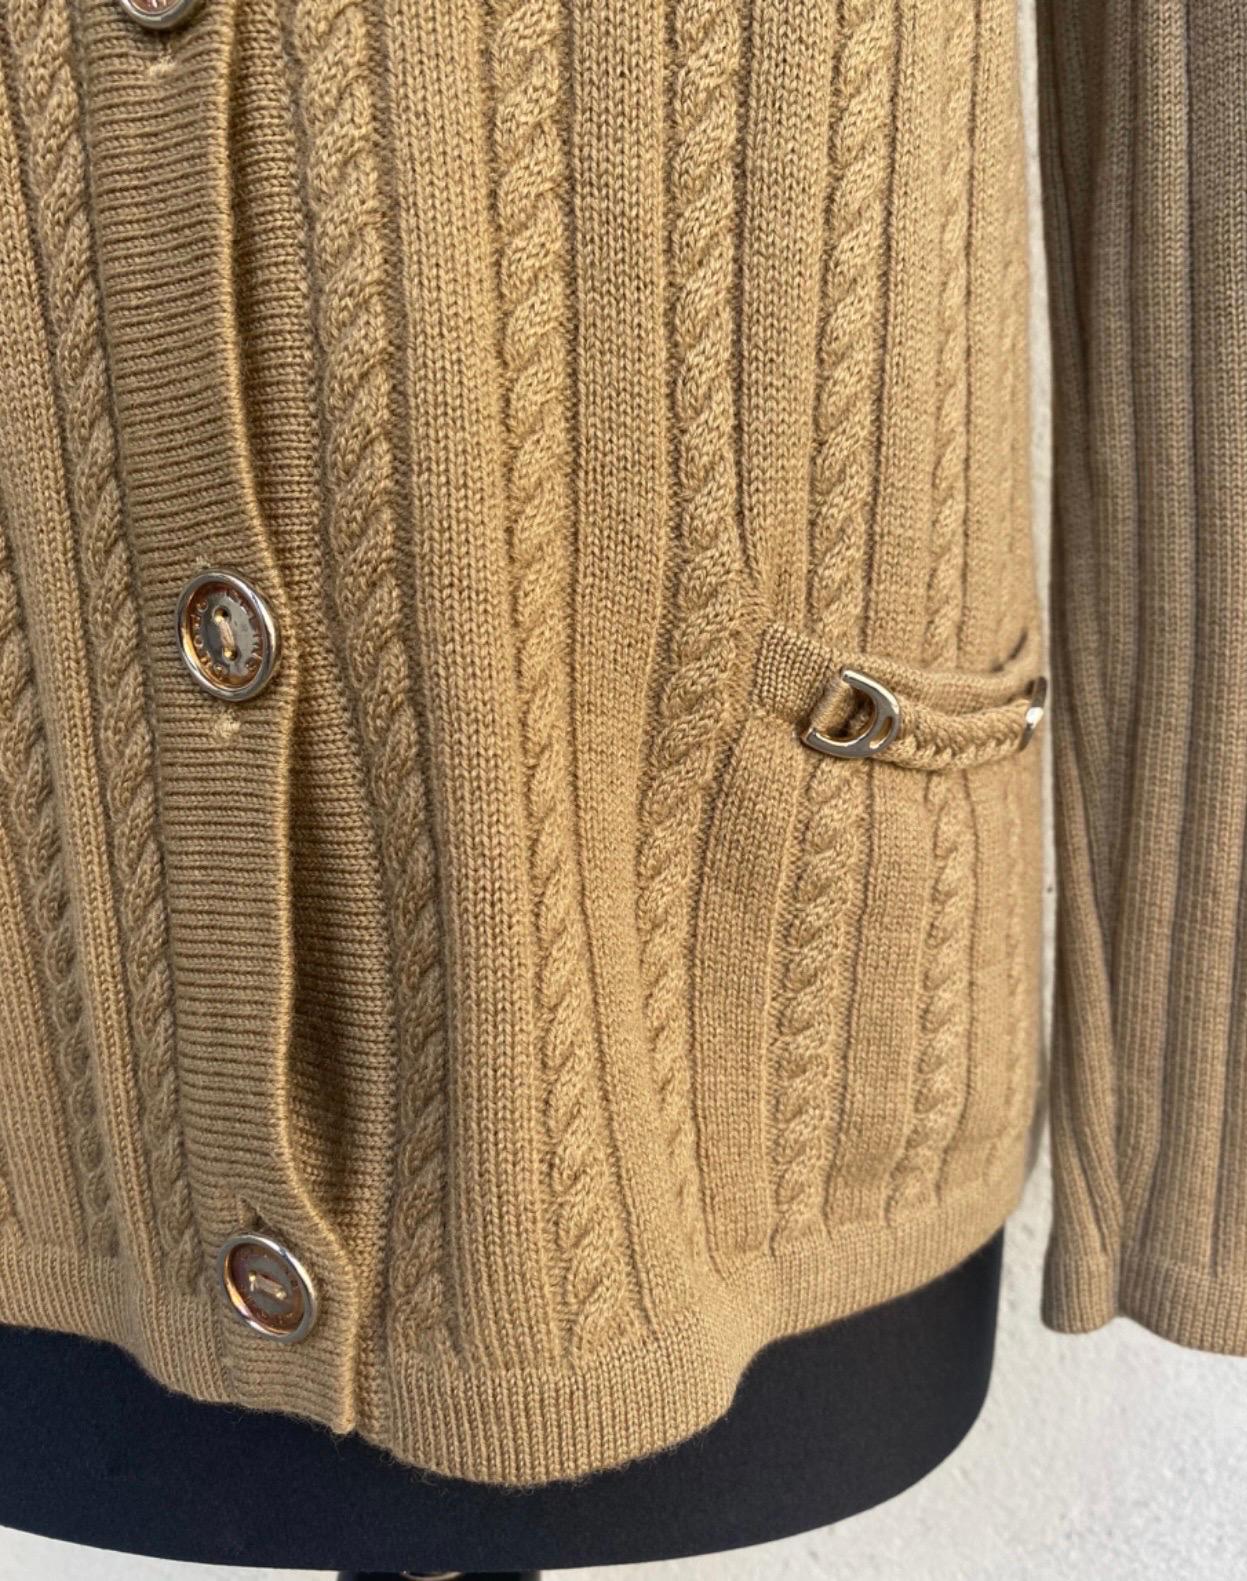 Celine vintage cardigan. 
In camel-colored wool. 
Featuring buttons and steel hardware.
Italian size 44.
measurements:
shoulders 39 cm
bust 44 cm
length 58 cm
sleeve 56 cm
excellent general conditions